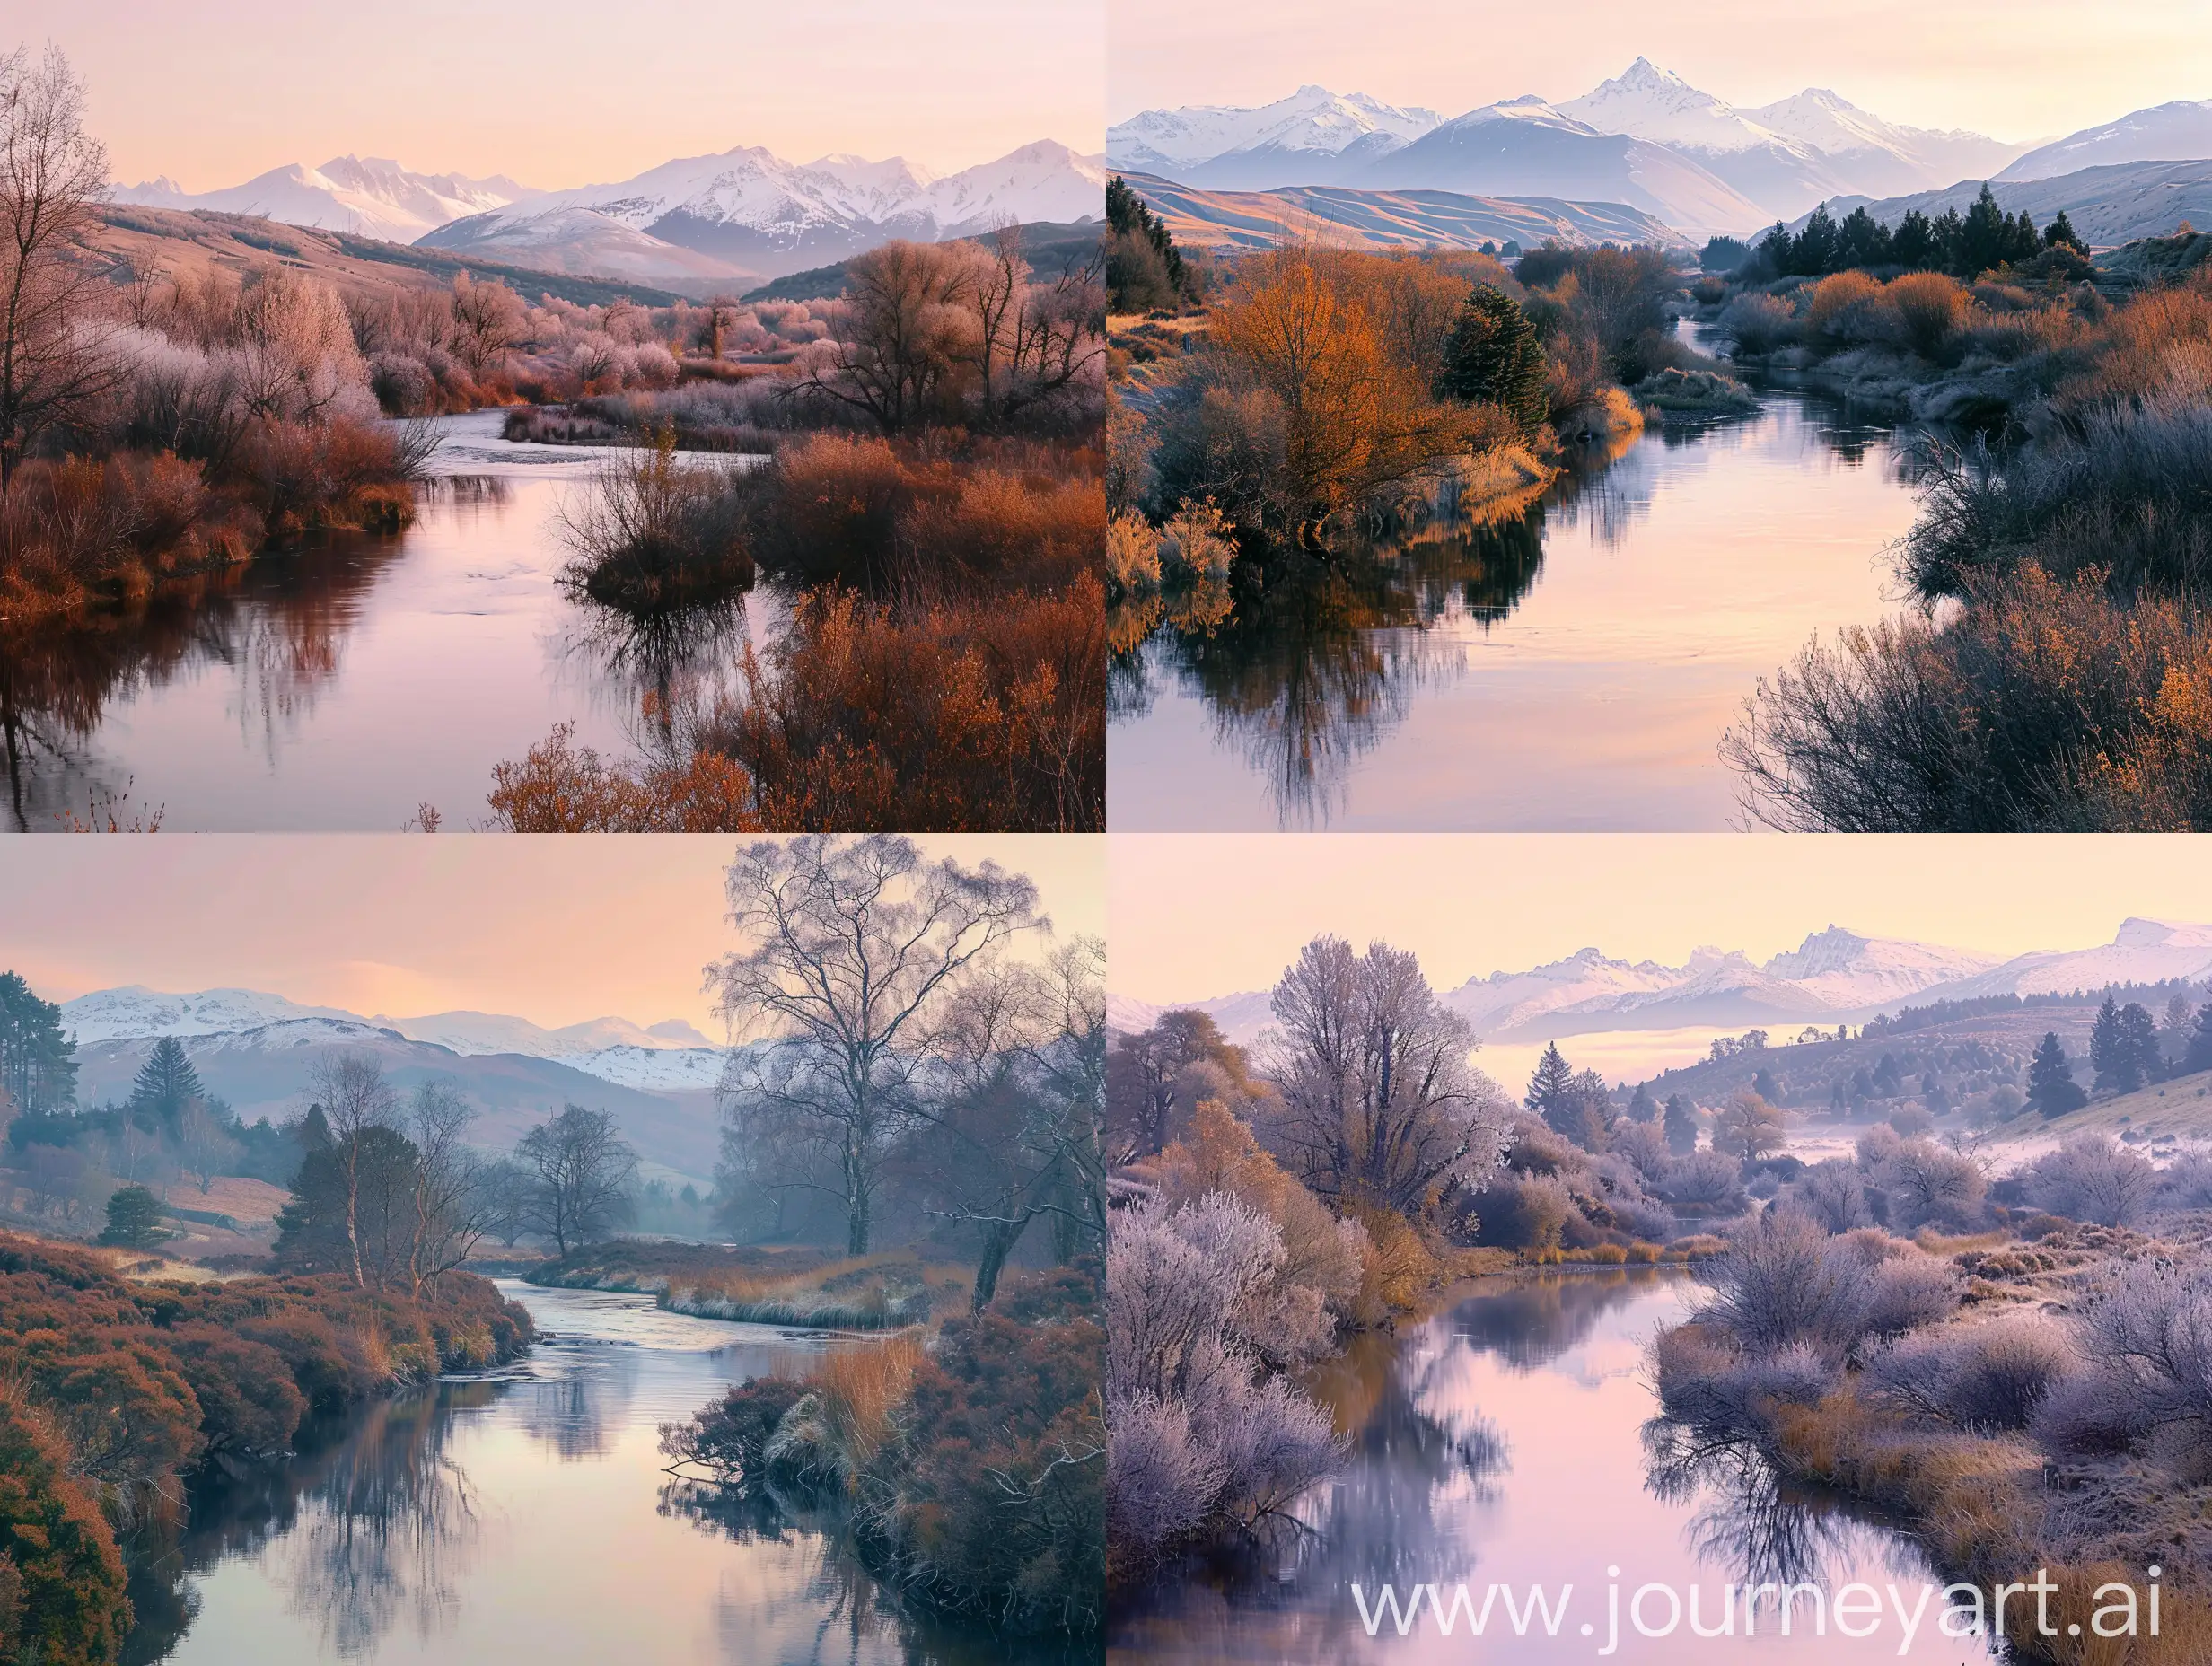 Tranquil-Sunrise-in-a-Highland-River-Valley-with-Snowy-Peaks